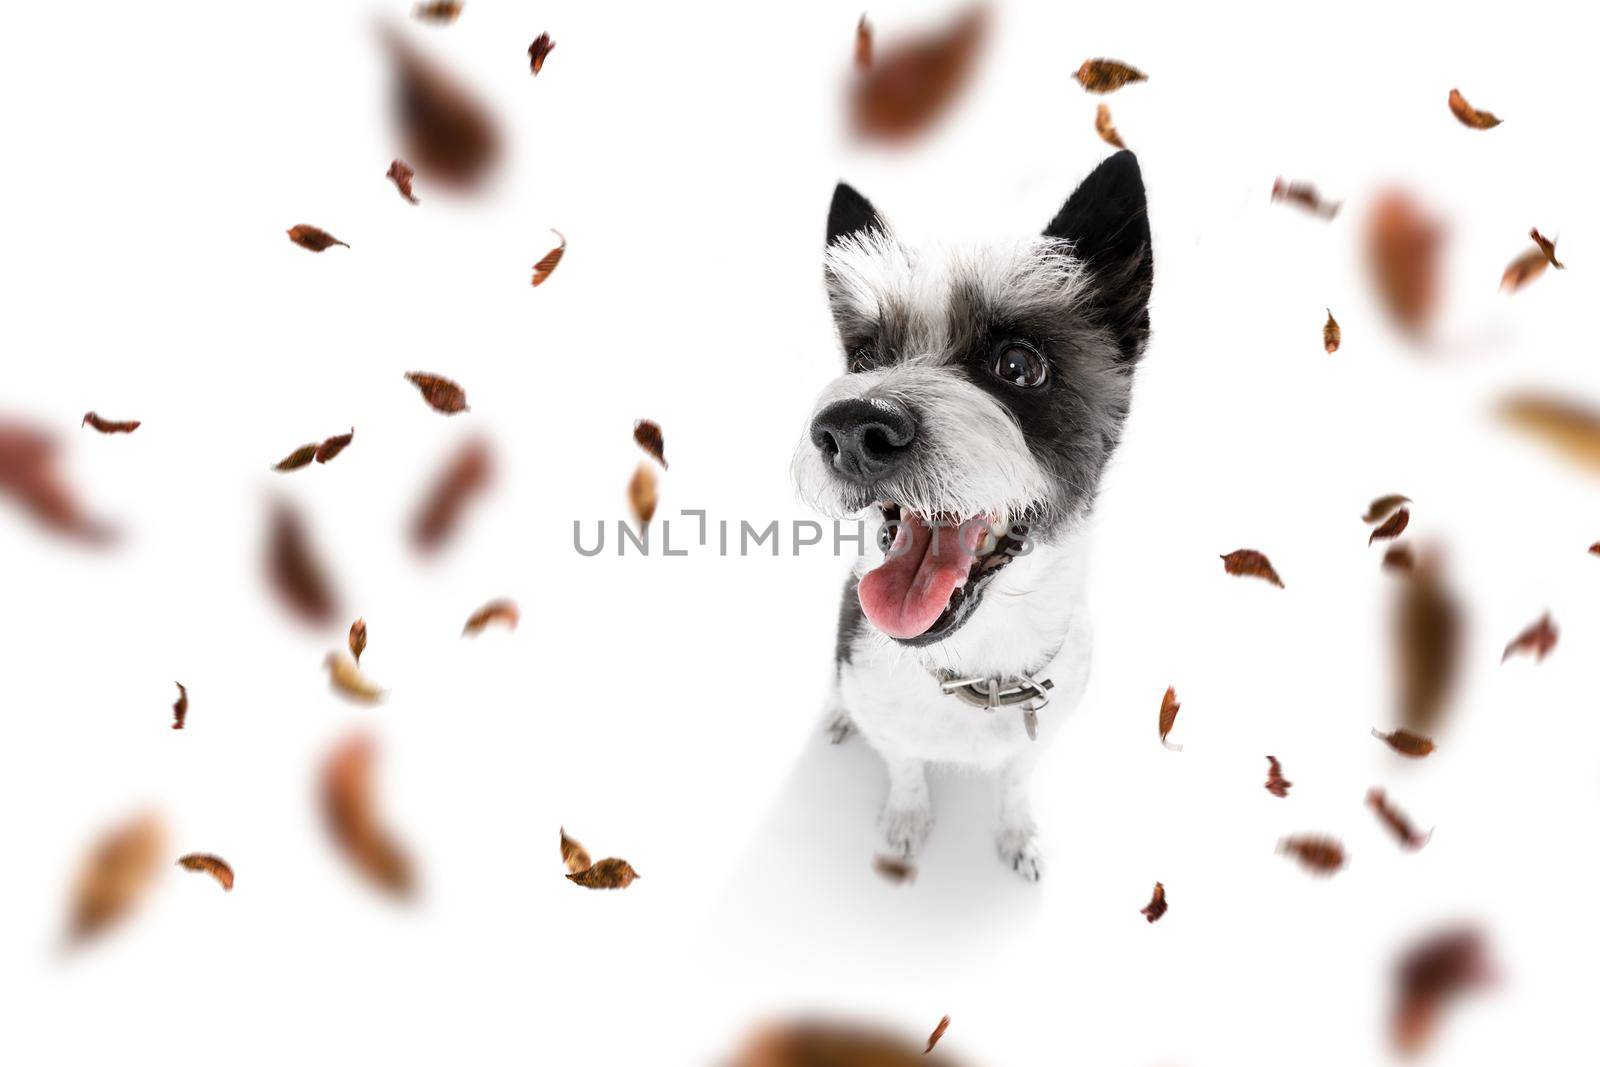 poodle   dog waiting for owner to play  and go for a walk with leash, isolated on white background in autumn or fall with leaves